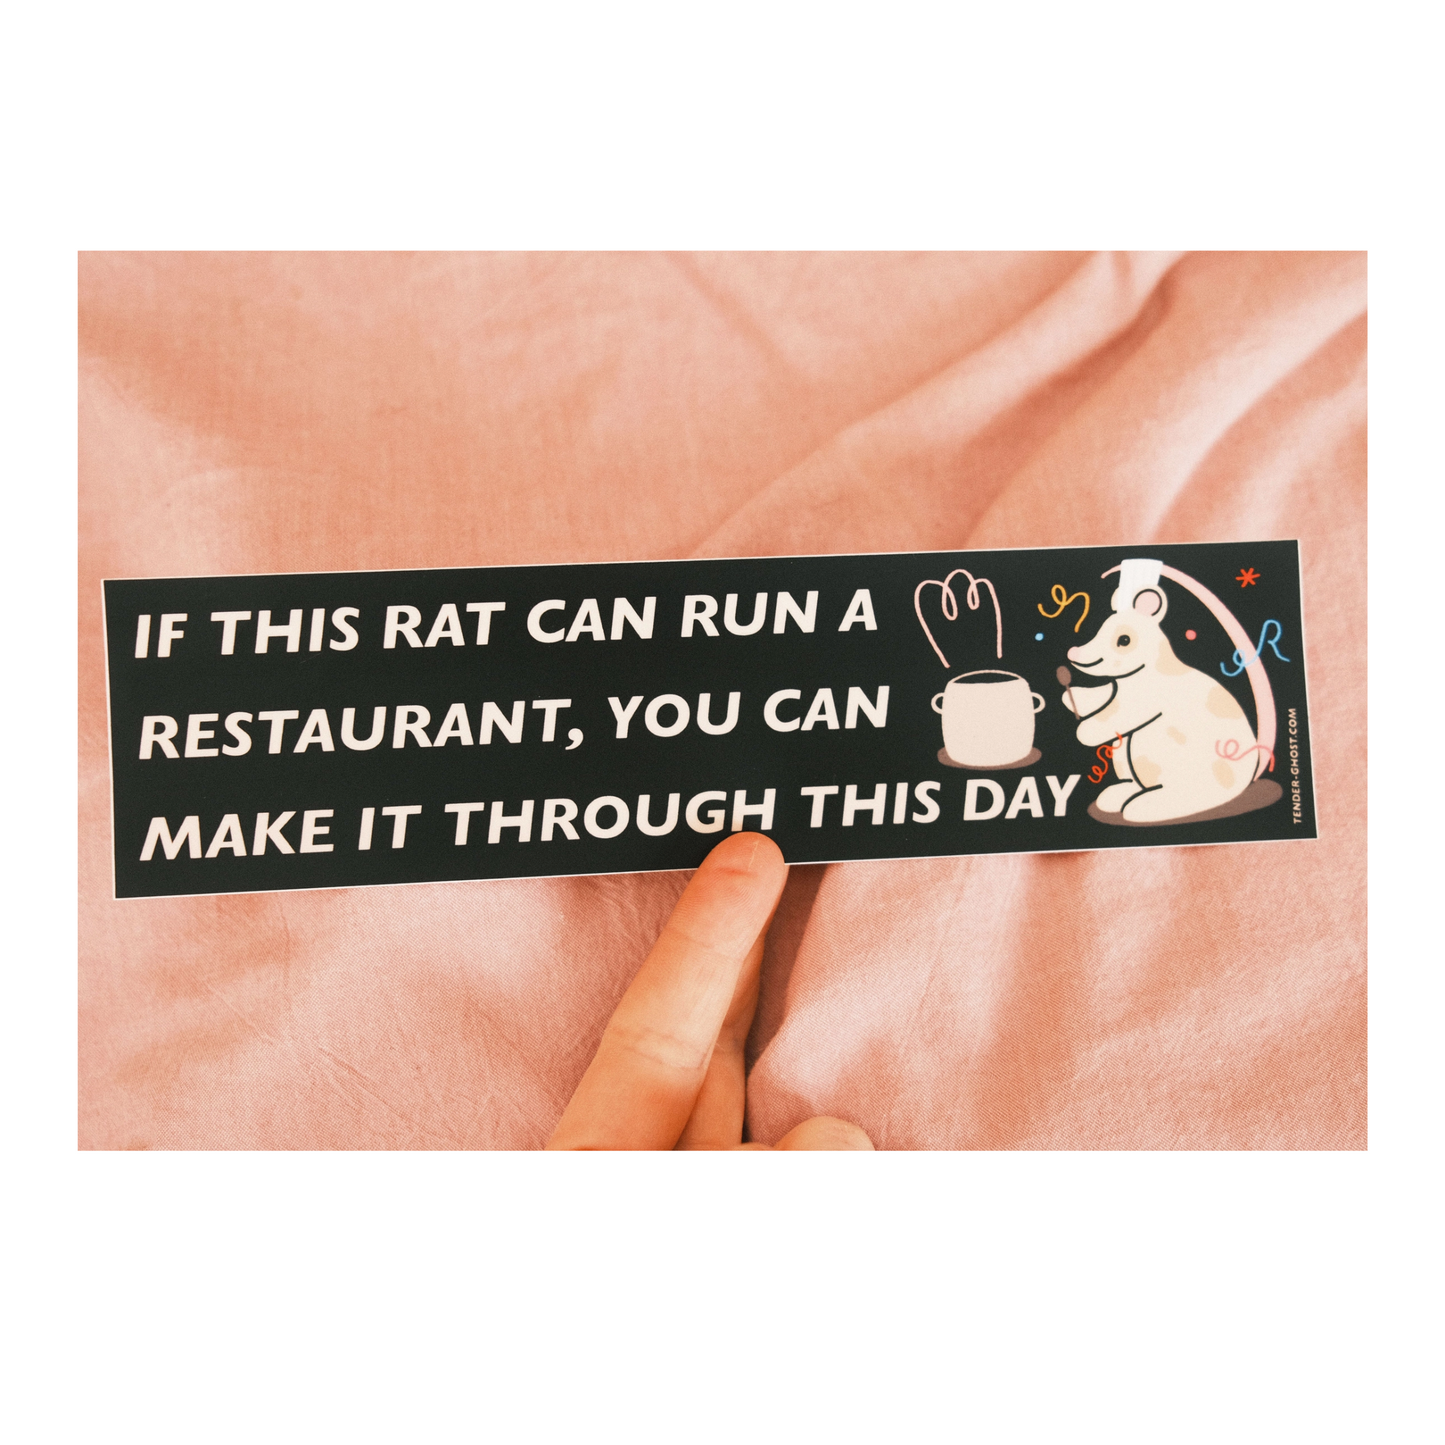 If This Rat Can Run A Restaurant, You Can Make It Through This Day Bumper Sticker